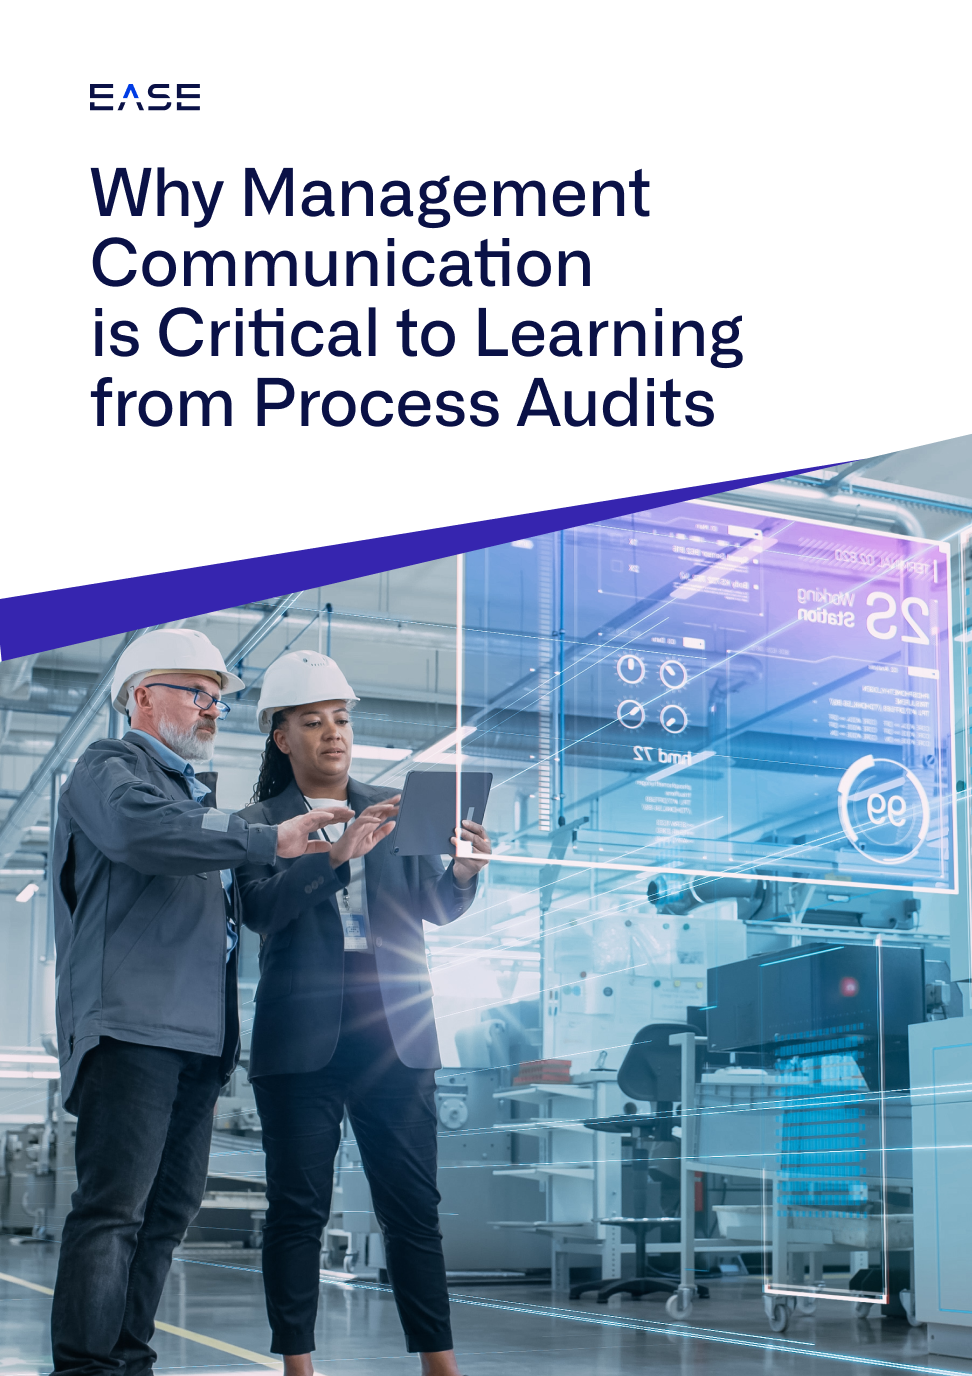 Why Management Communication is Critical to Learning from Process Audits